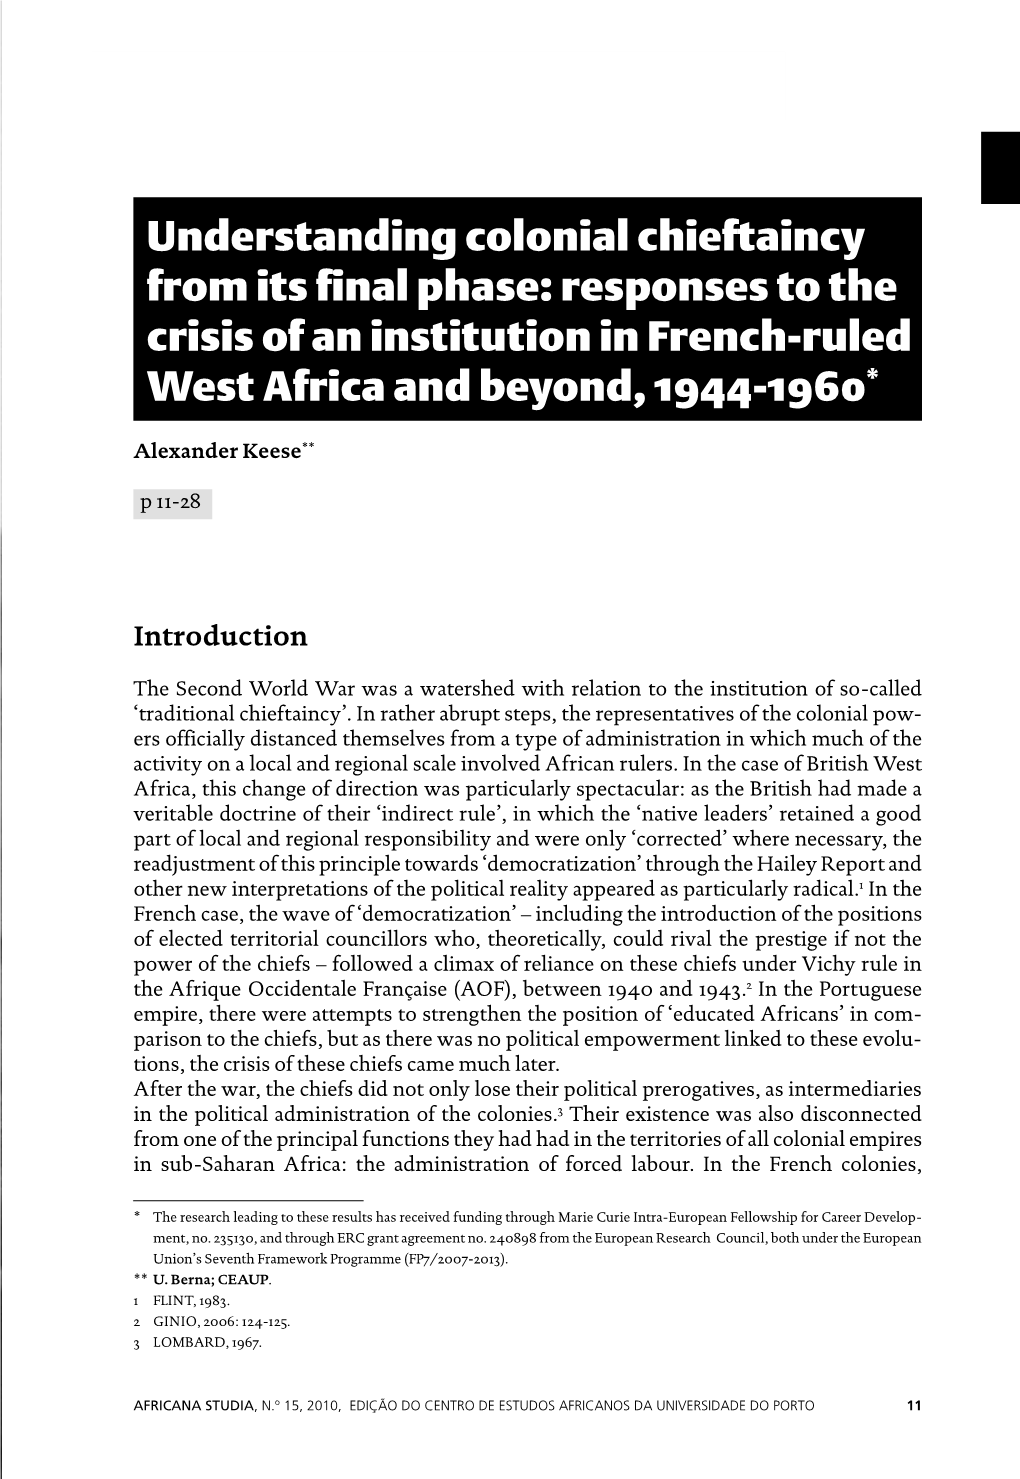 Responses to the Crisis of an Institution in French-Ruled West Africa A